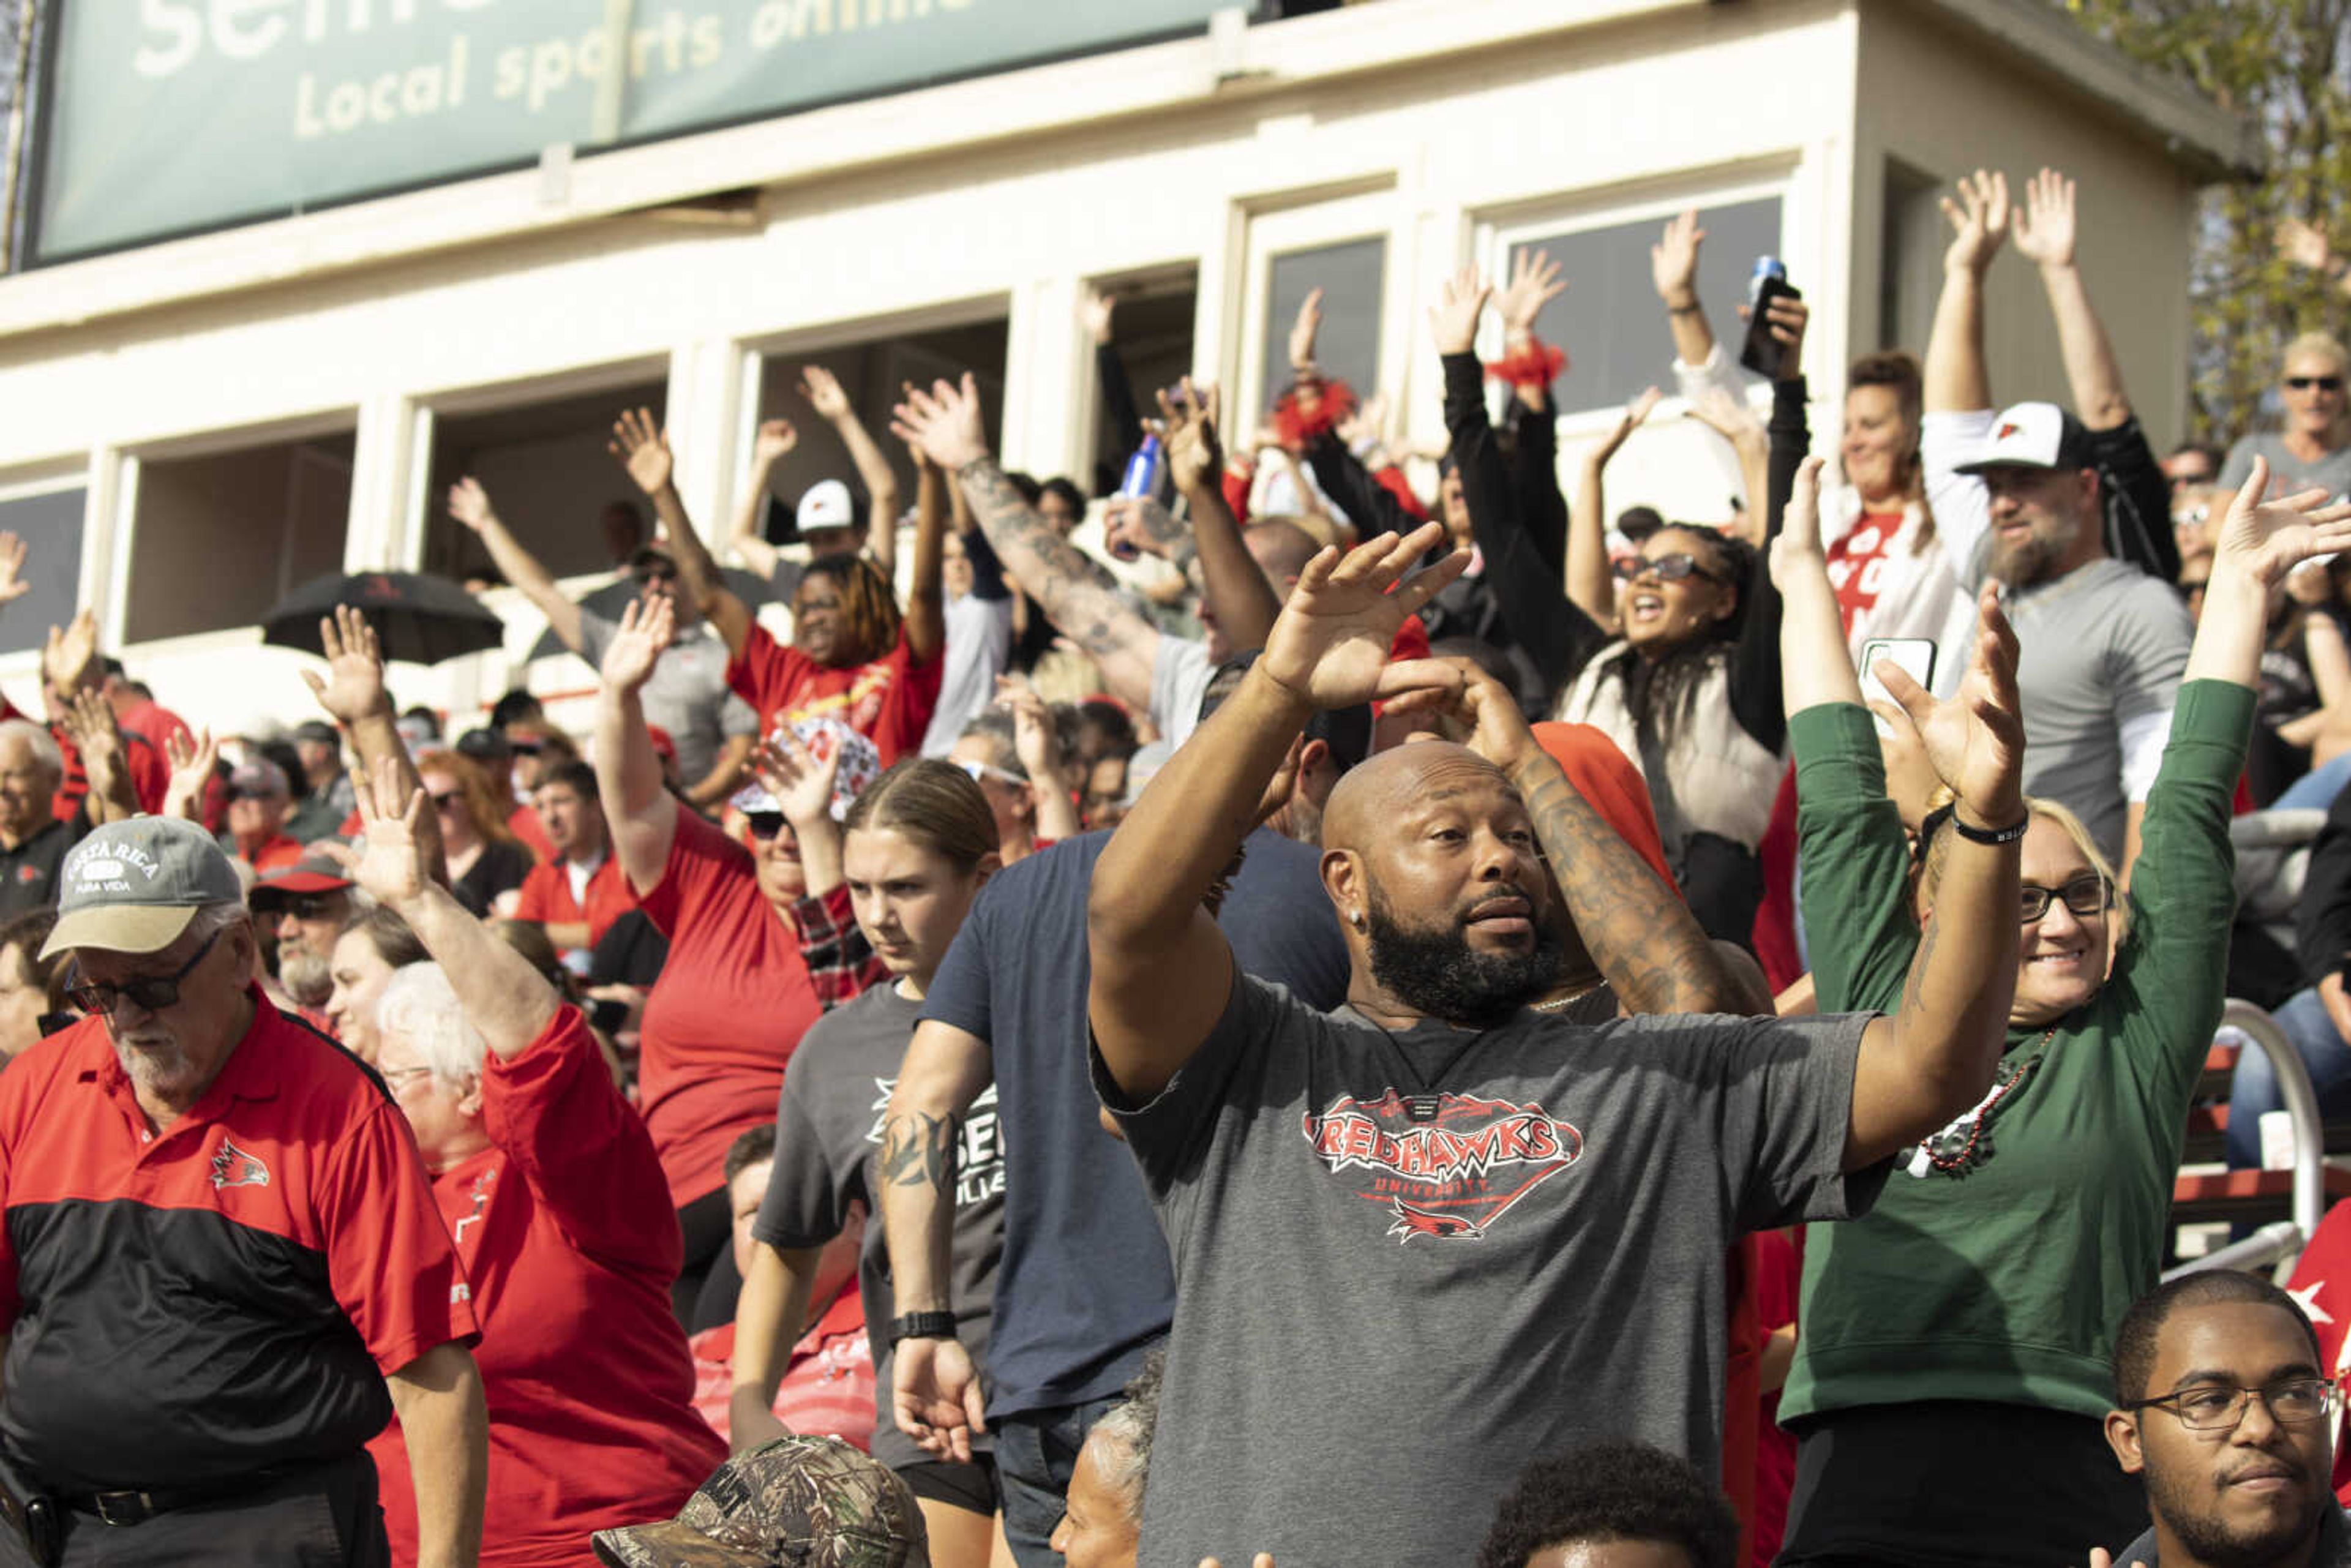 Fans cheer on the Redhawks at their Homecoming football game on Saturday, Oct. 29, 2022 at Houck Stadium.